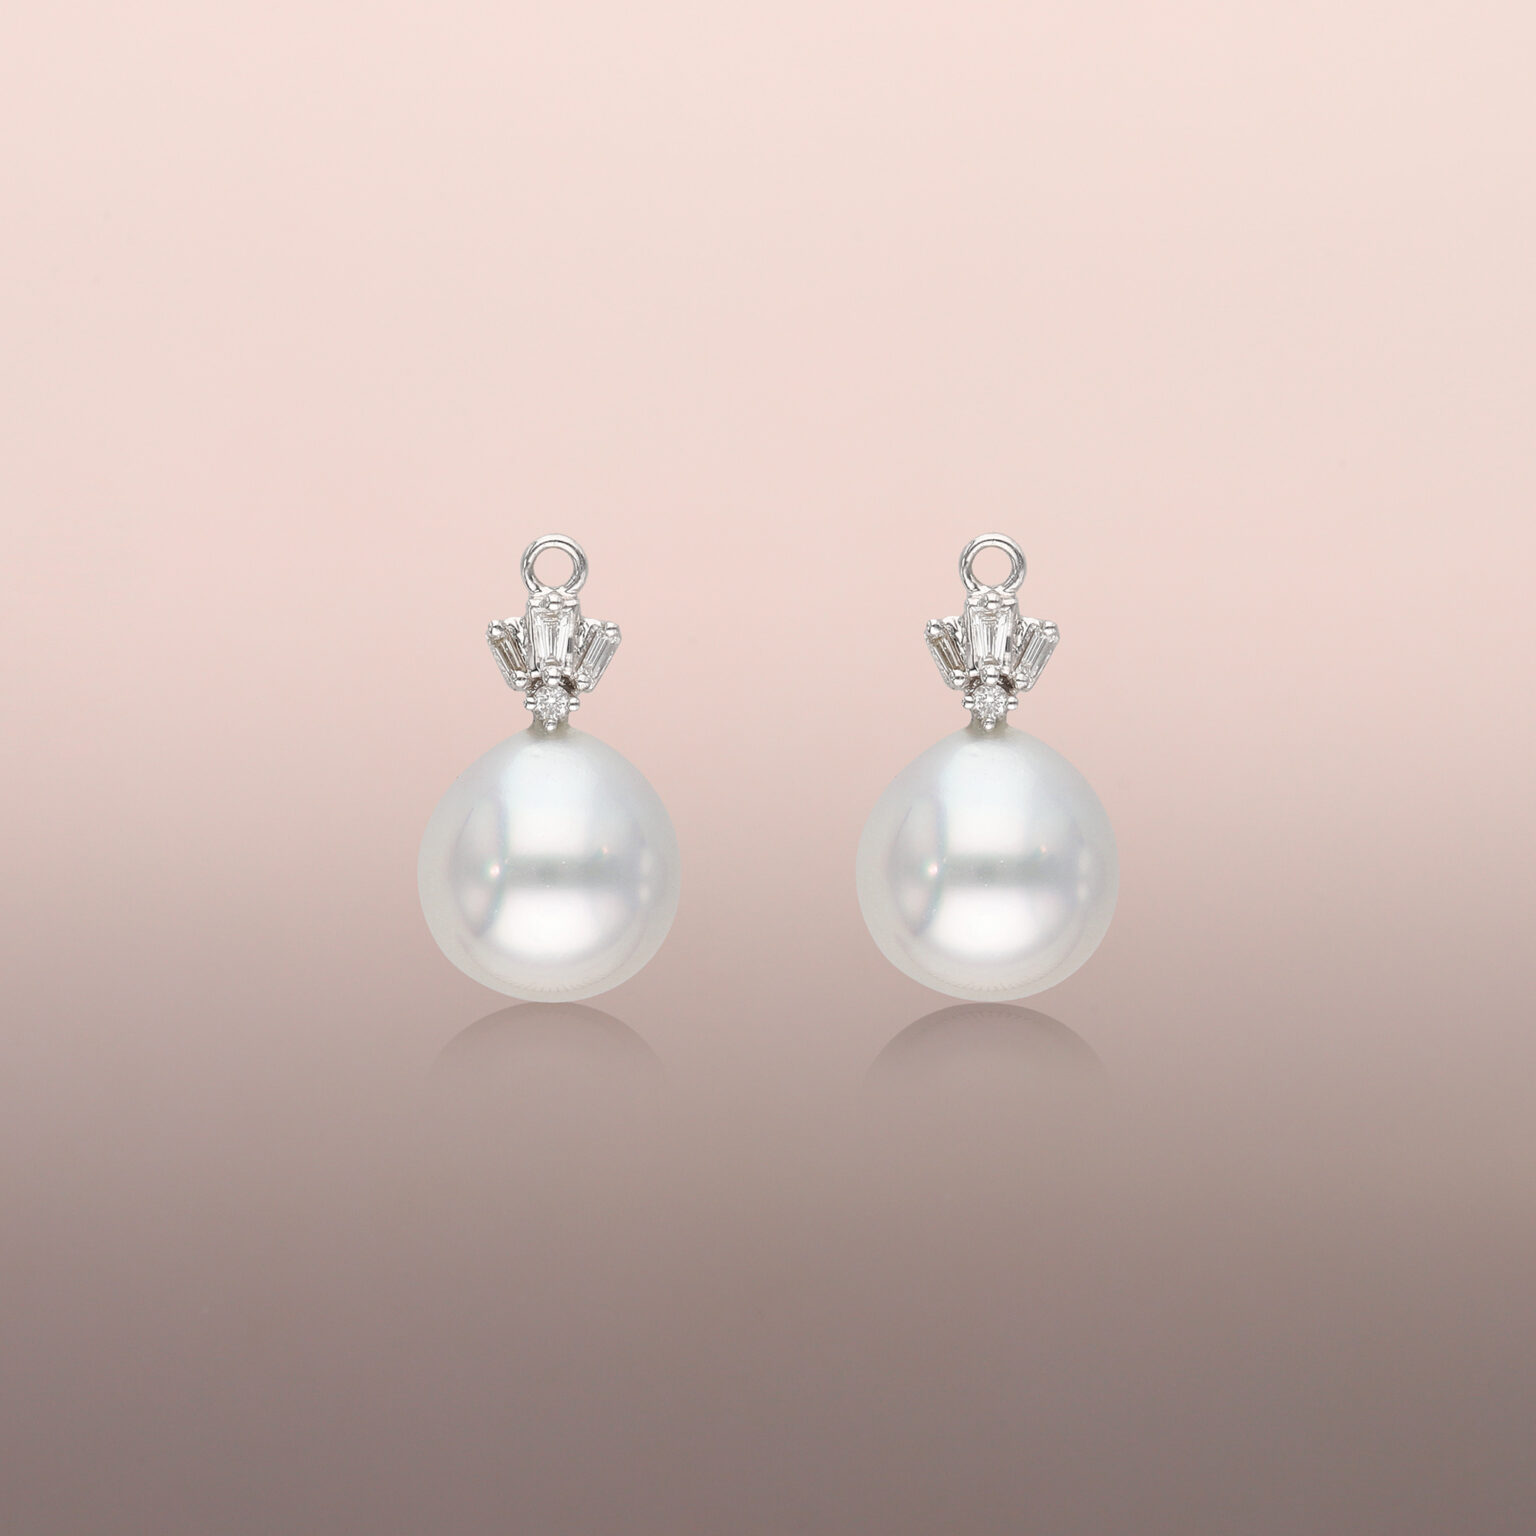 Pearl drop earrings with tapered baguette diamonds